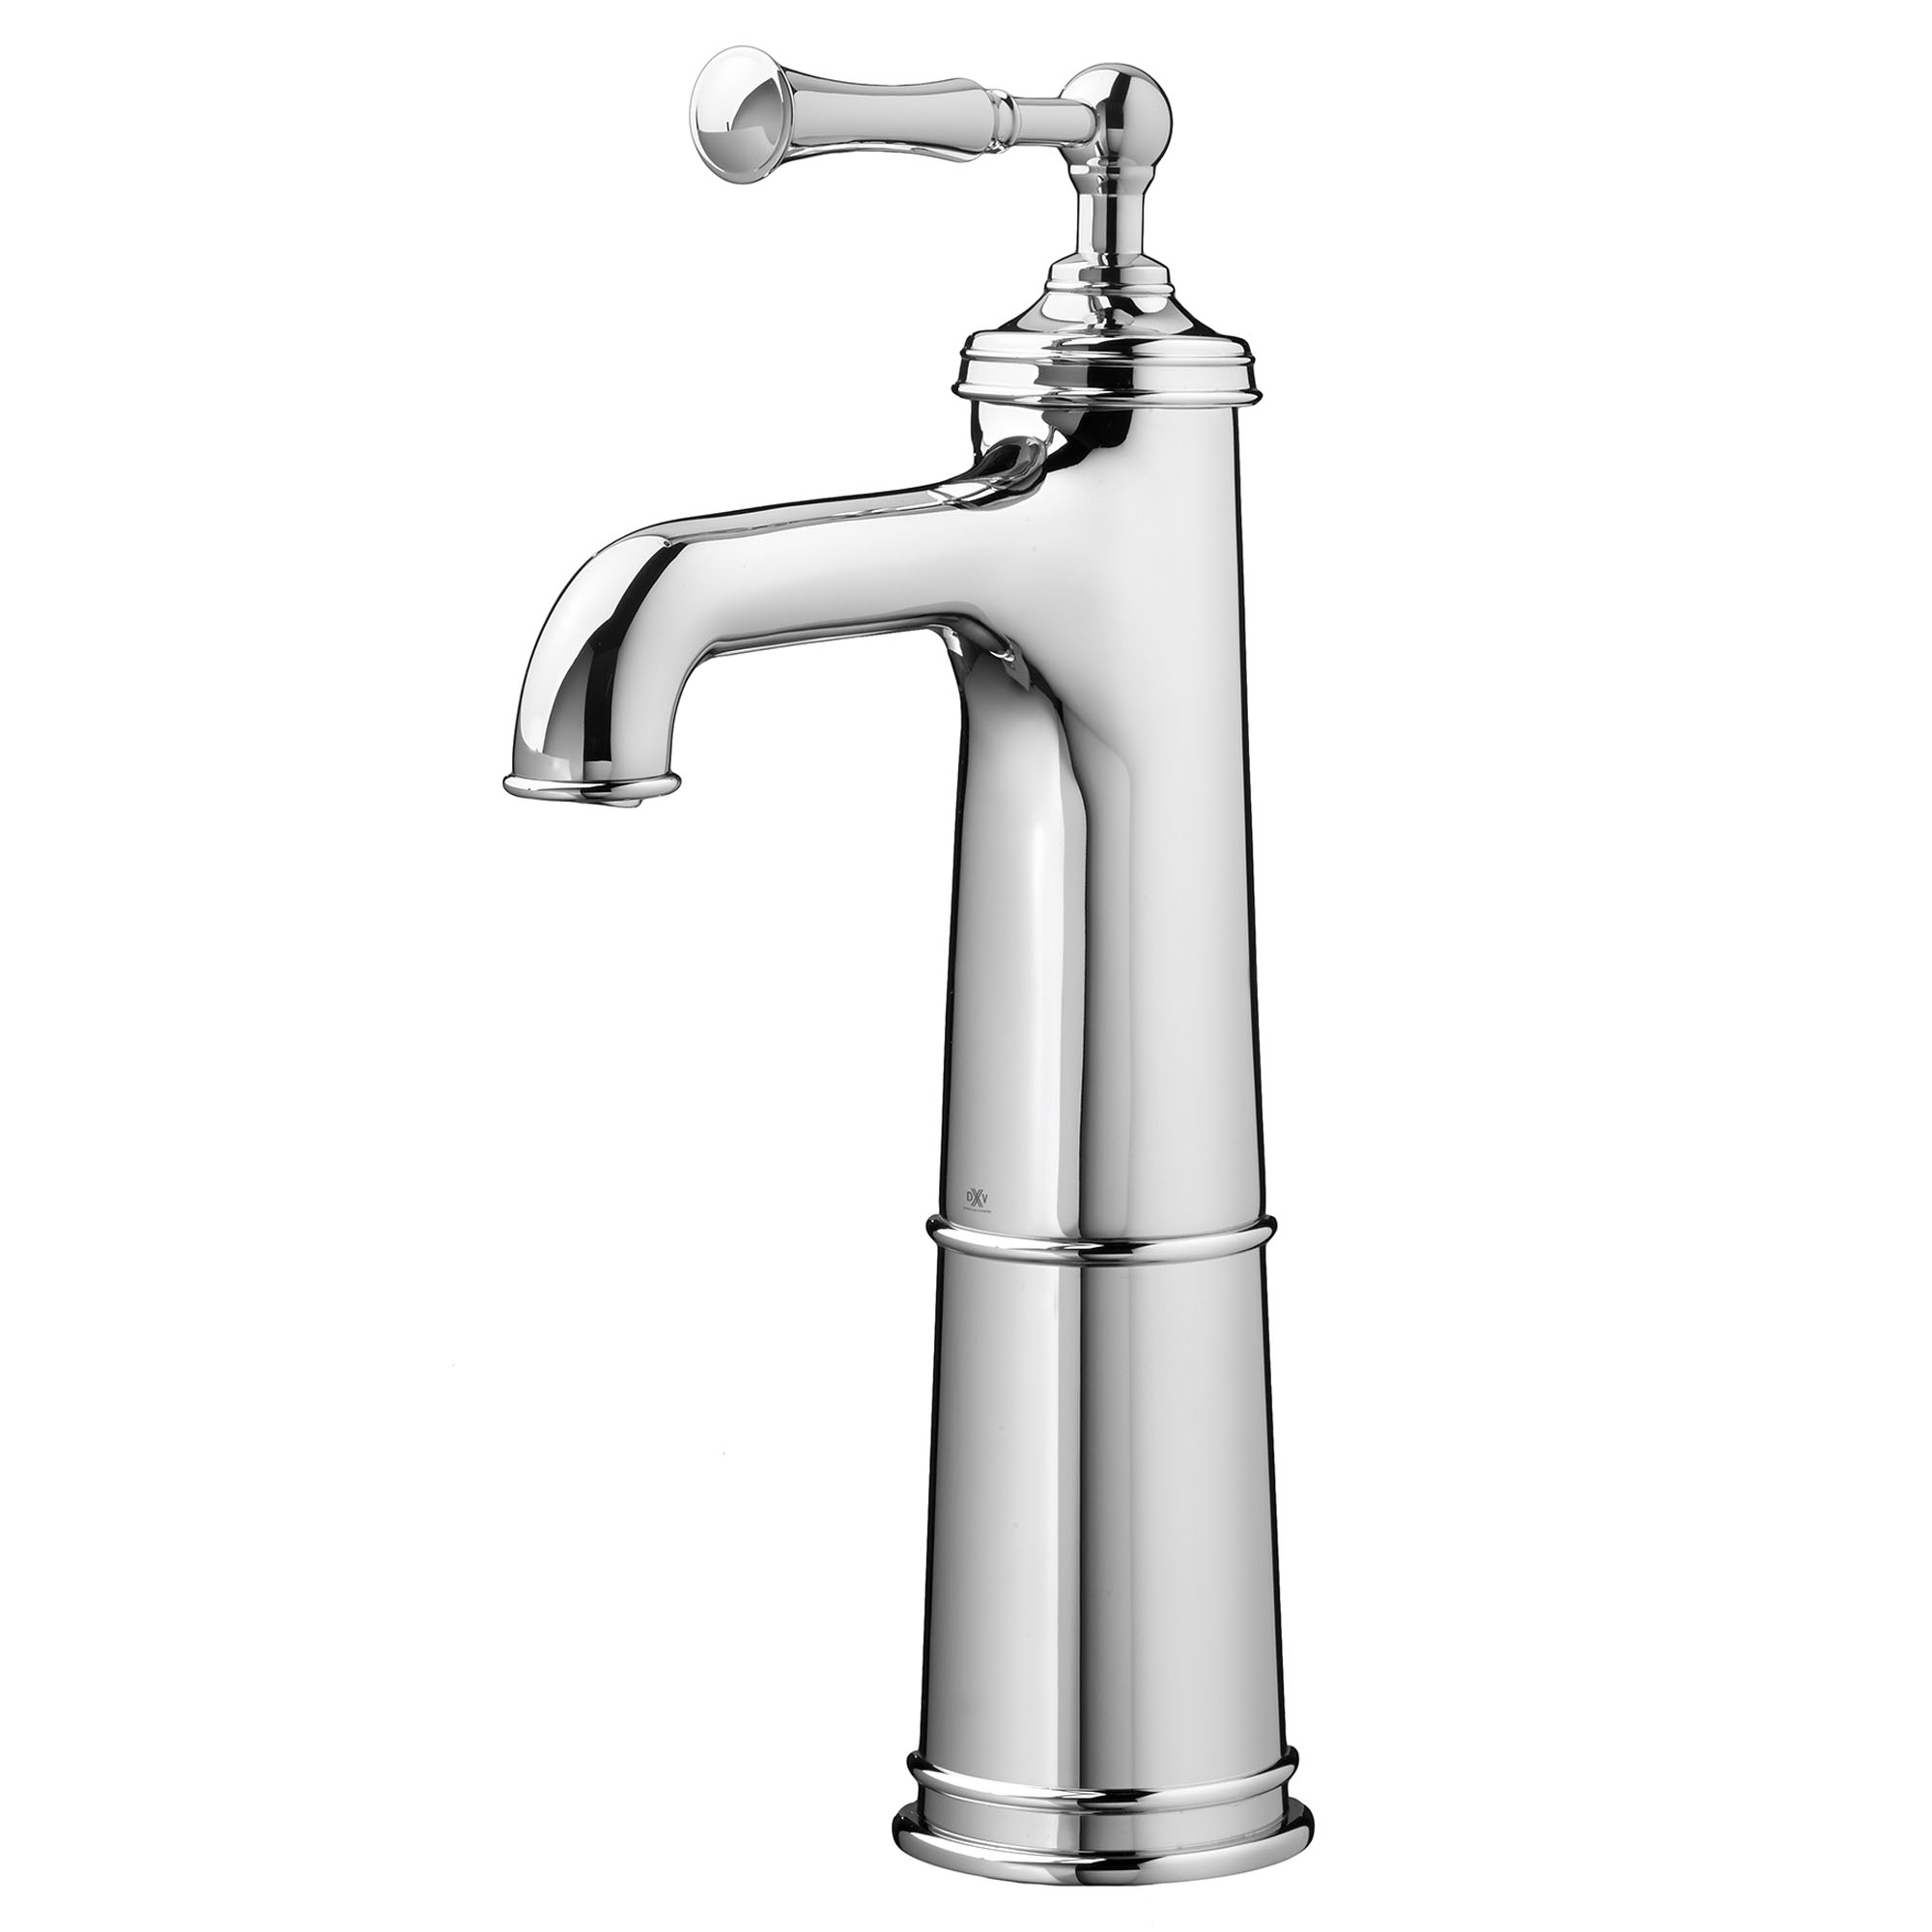 Vessel Faucet With Drain,